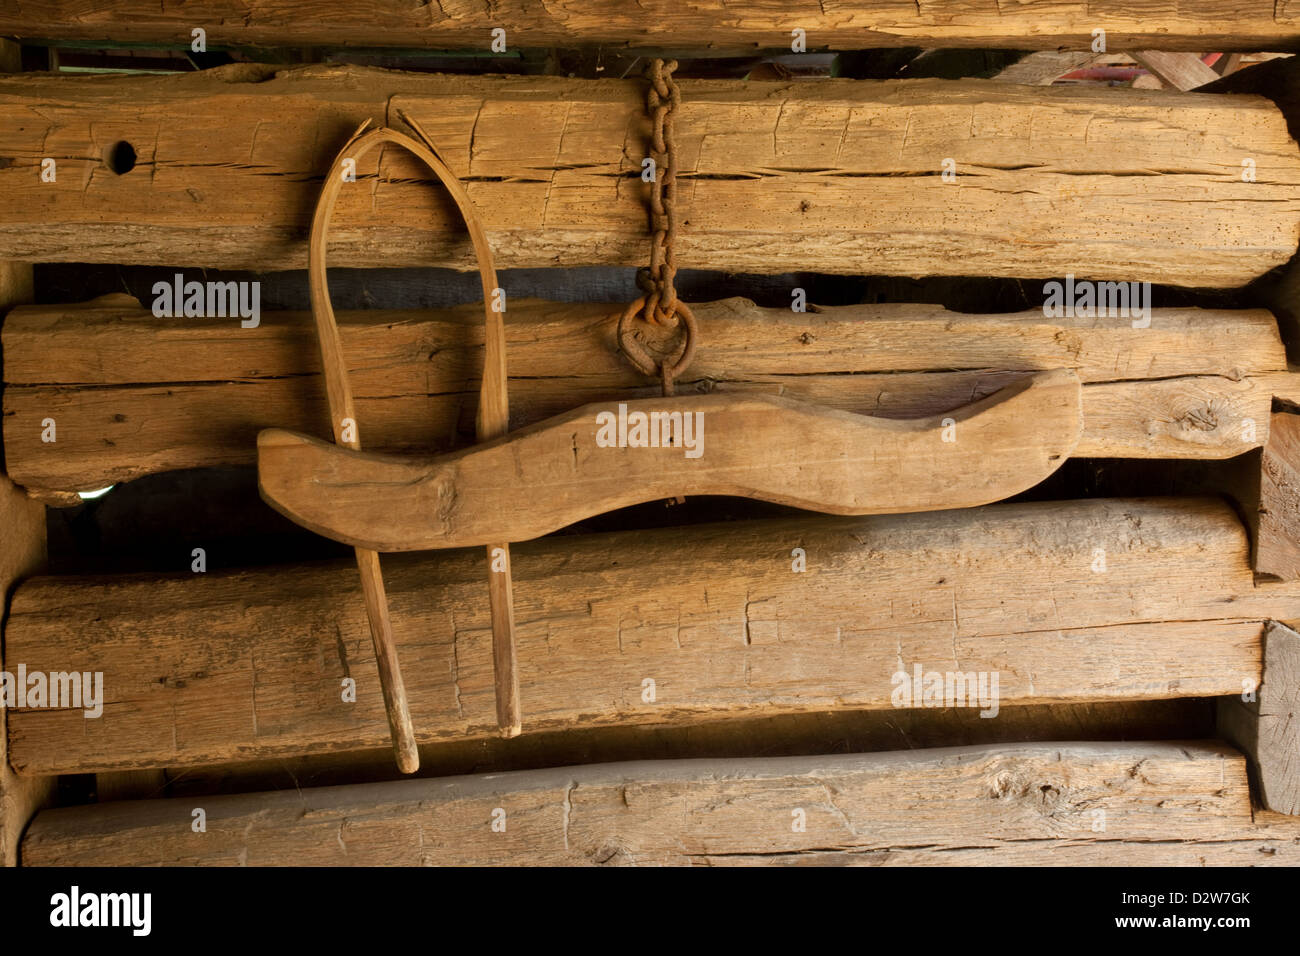 Half of an ox yoke, hanging on some rough walls, suspended by a rusty chain Stock Photo